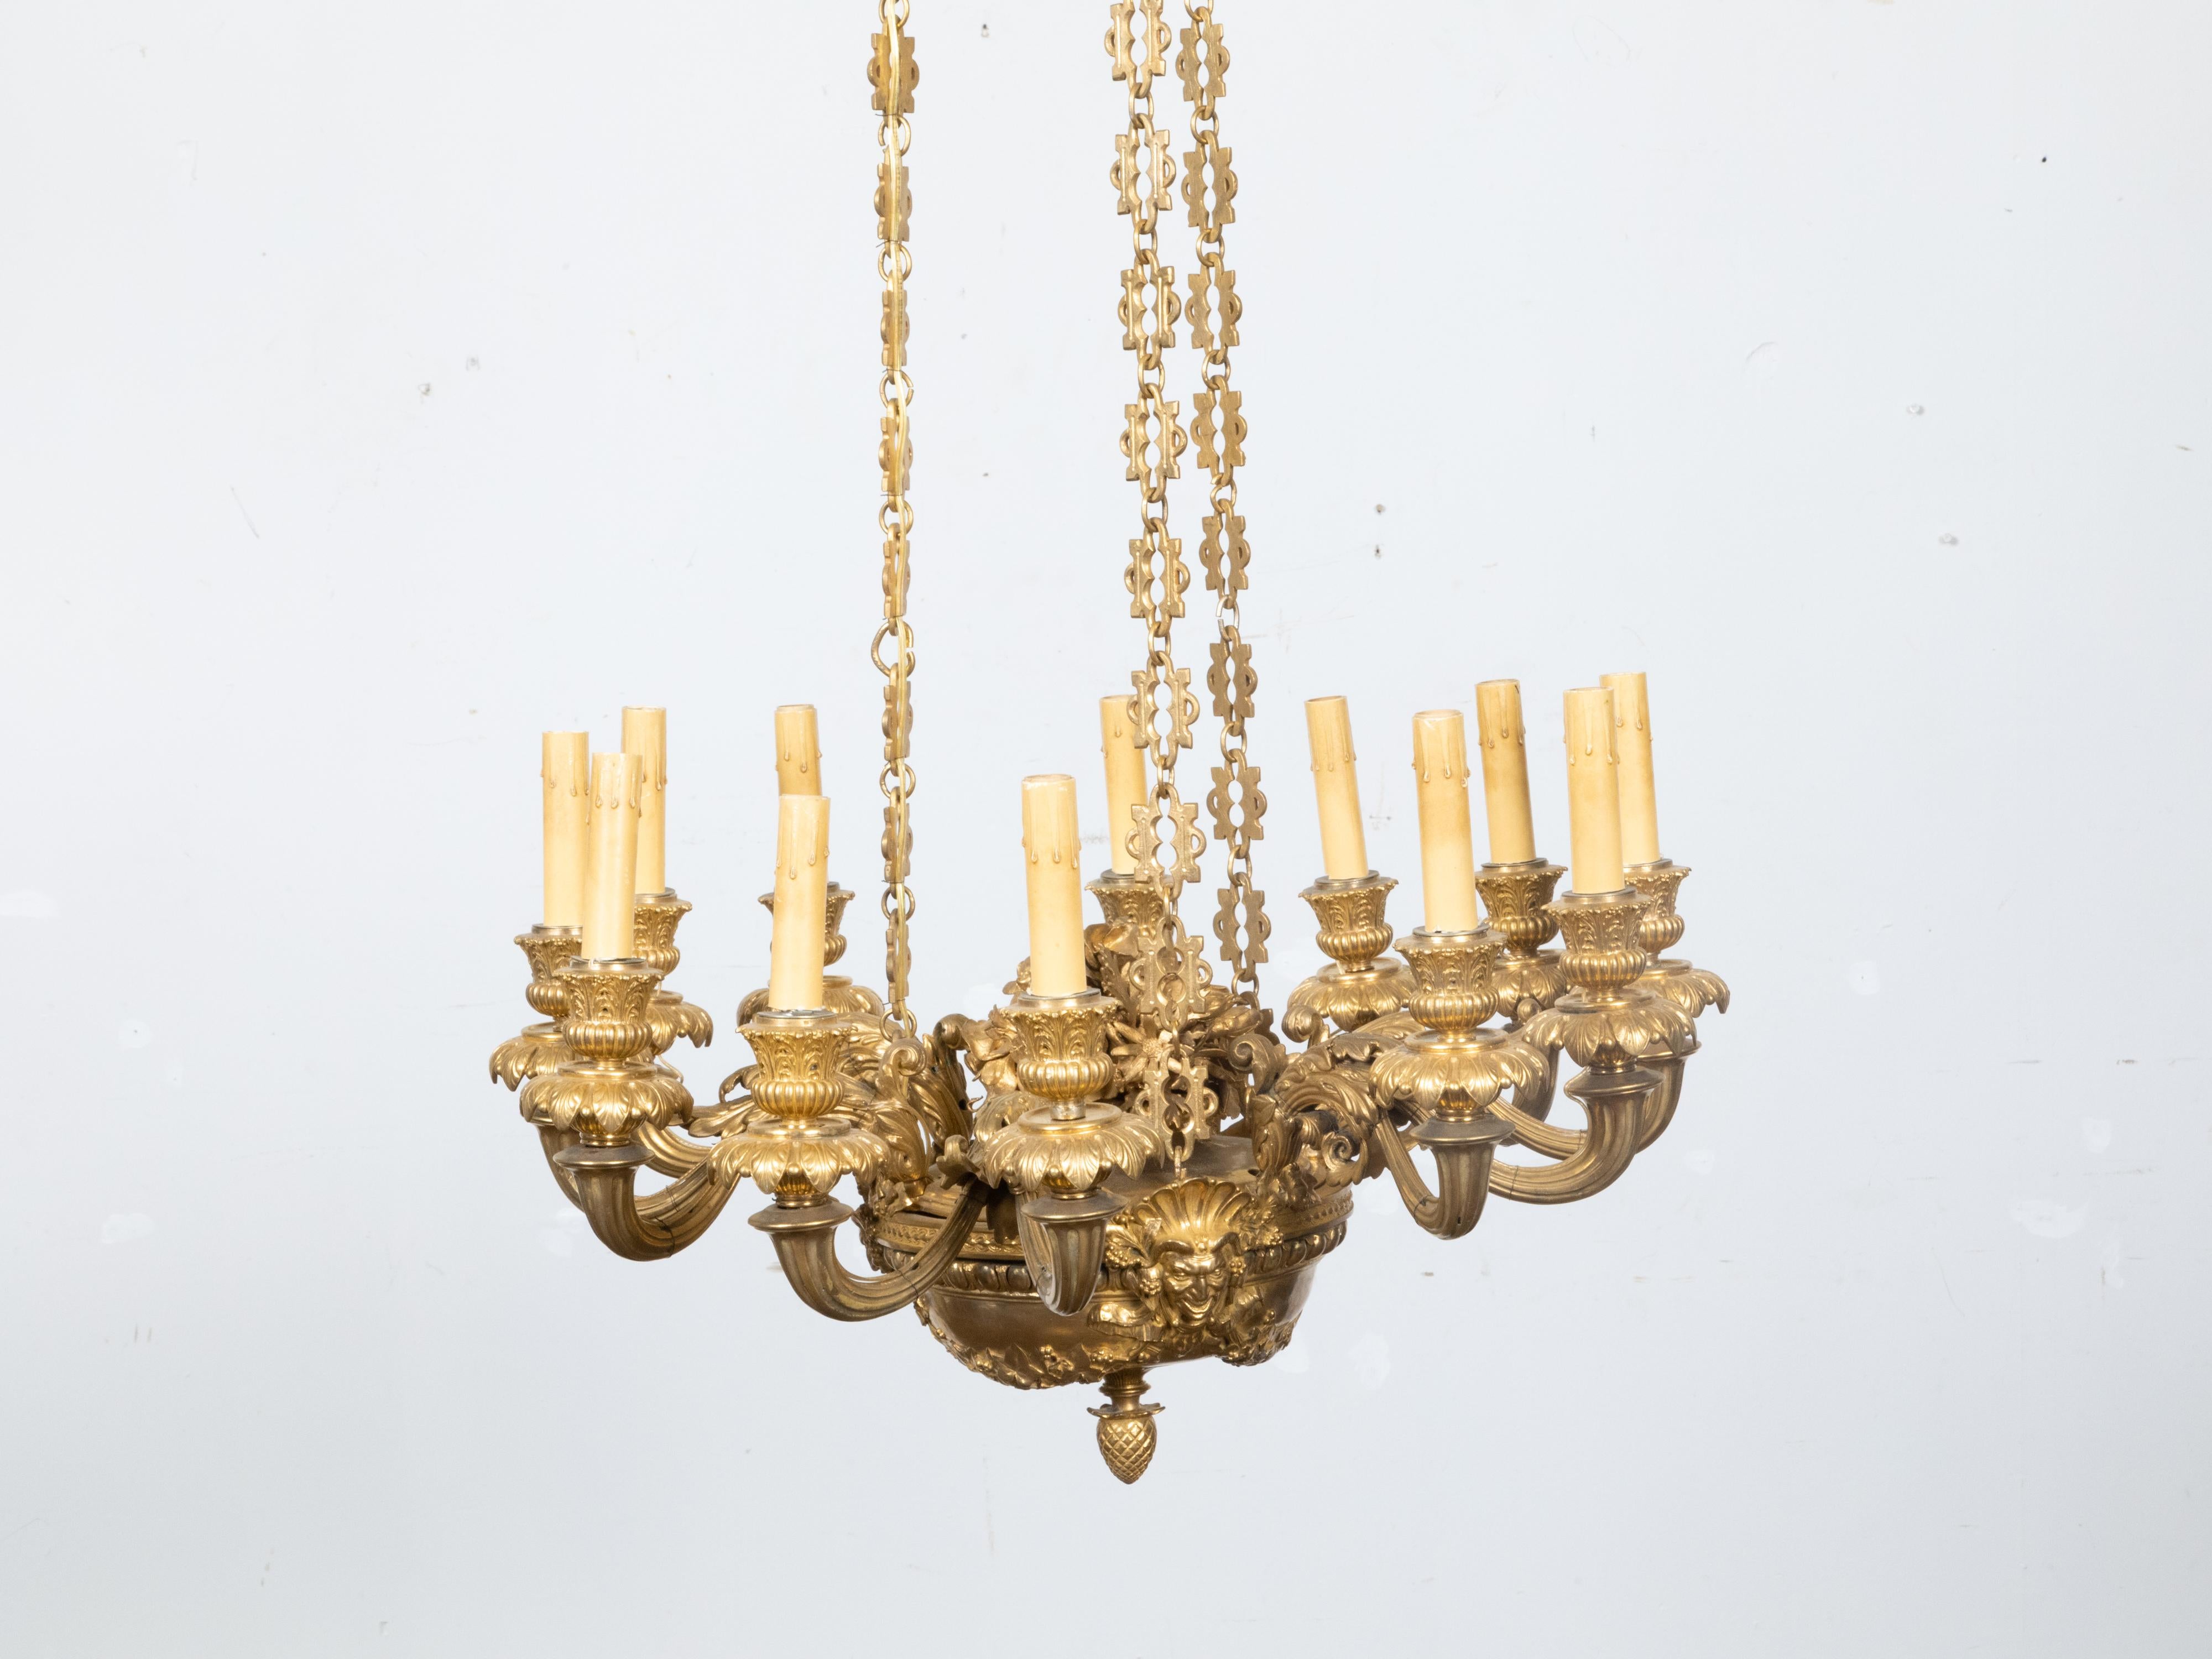 French Napoléon III 19th Century Gilt Bronze 12 Light Chandelier with Mascarons In Good Condition For Sale In Atlanta, GA